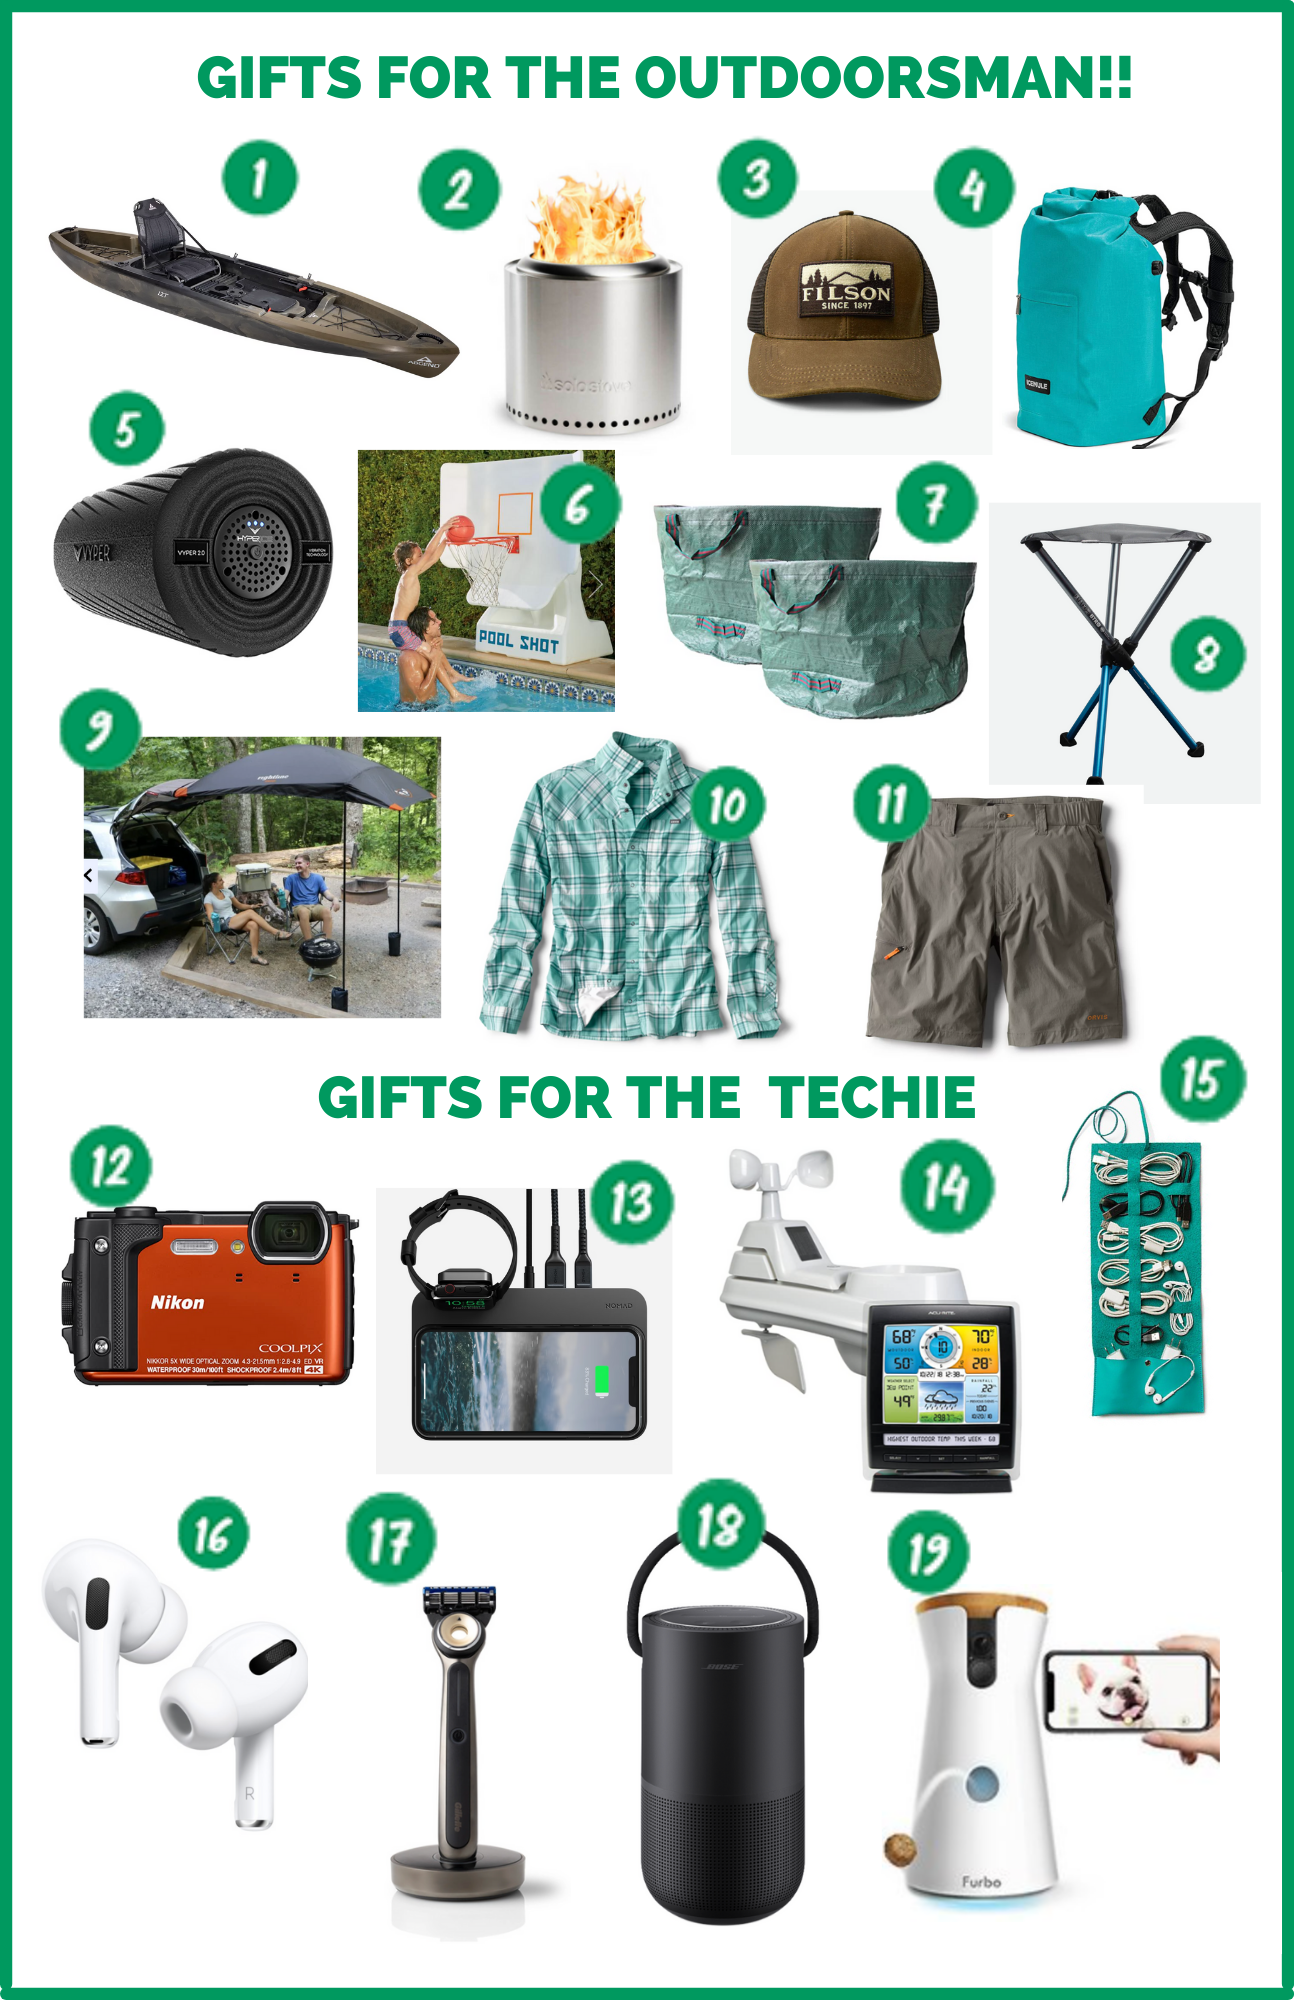 FATHER'S DAY GIFTS FOR THE OUTDOORSMAN or TECHIE!! — The Gift Trotter